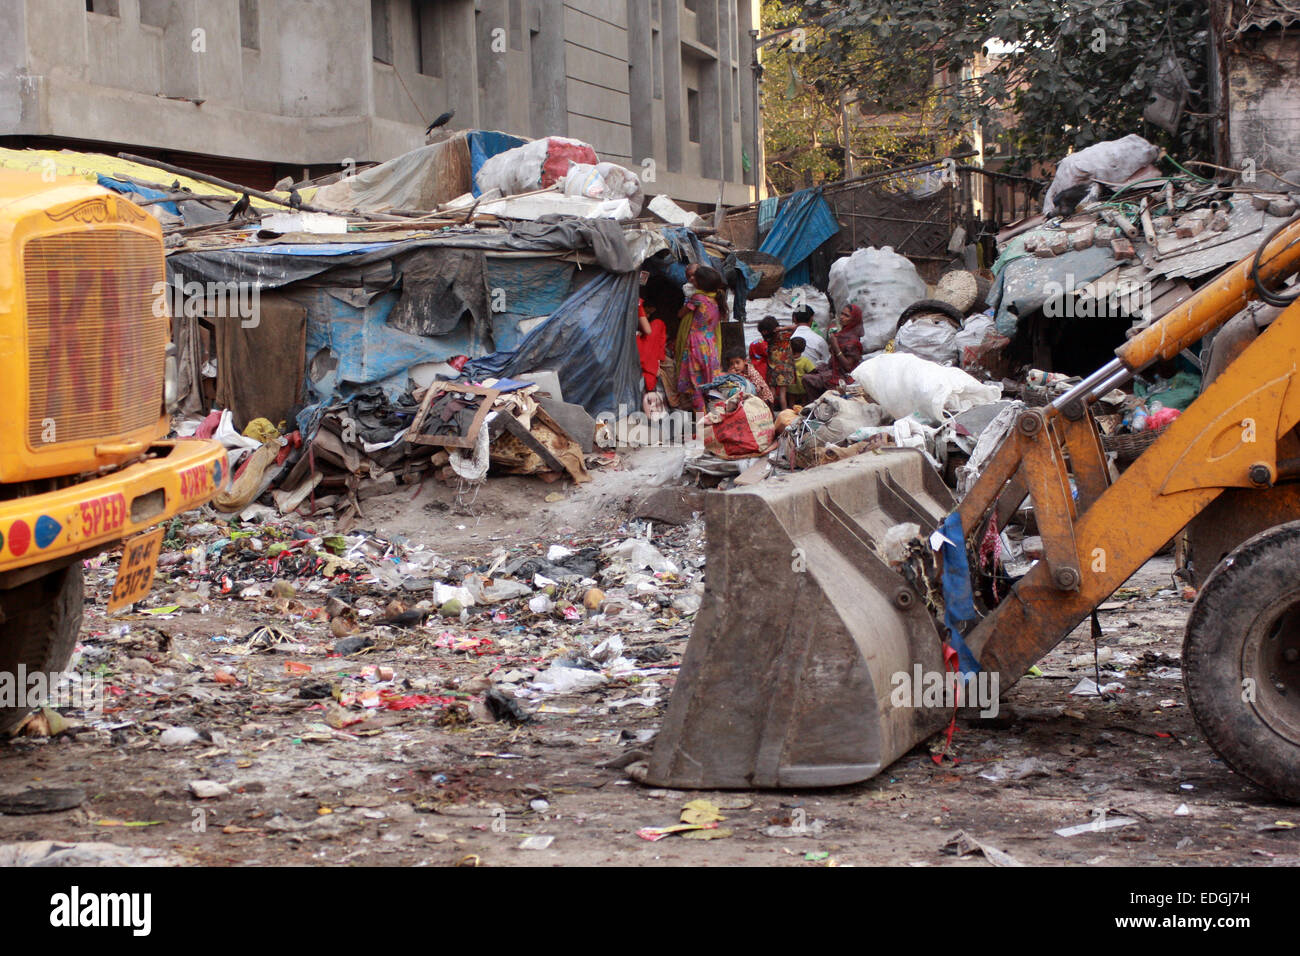 People living on a rubbish tip that is gradually being cleared away, in Old Chinatown district of Kolkata (Calcutta), India Stock Photo